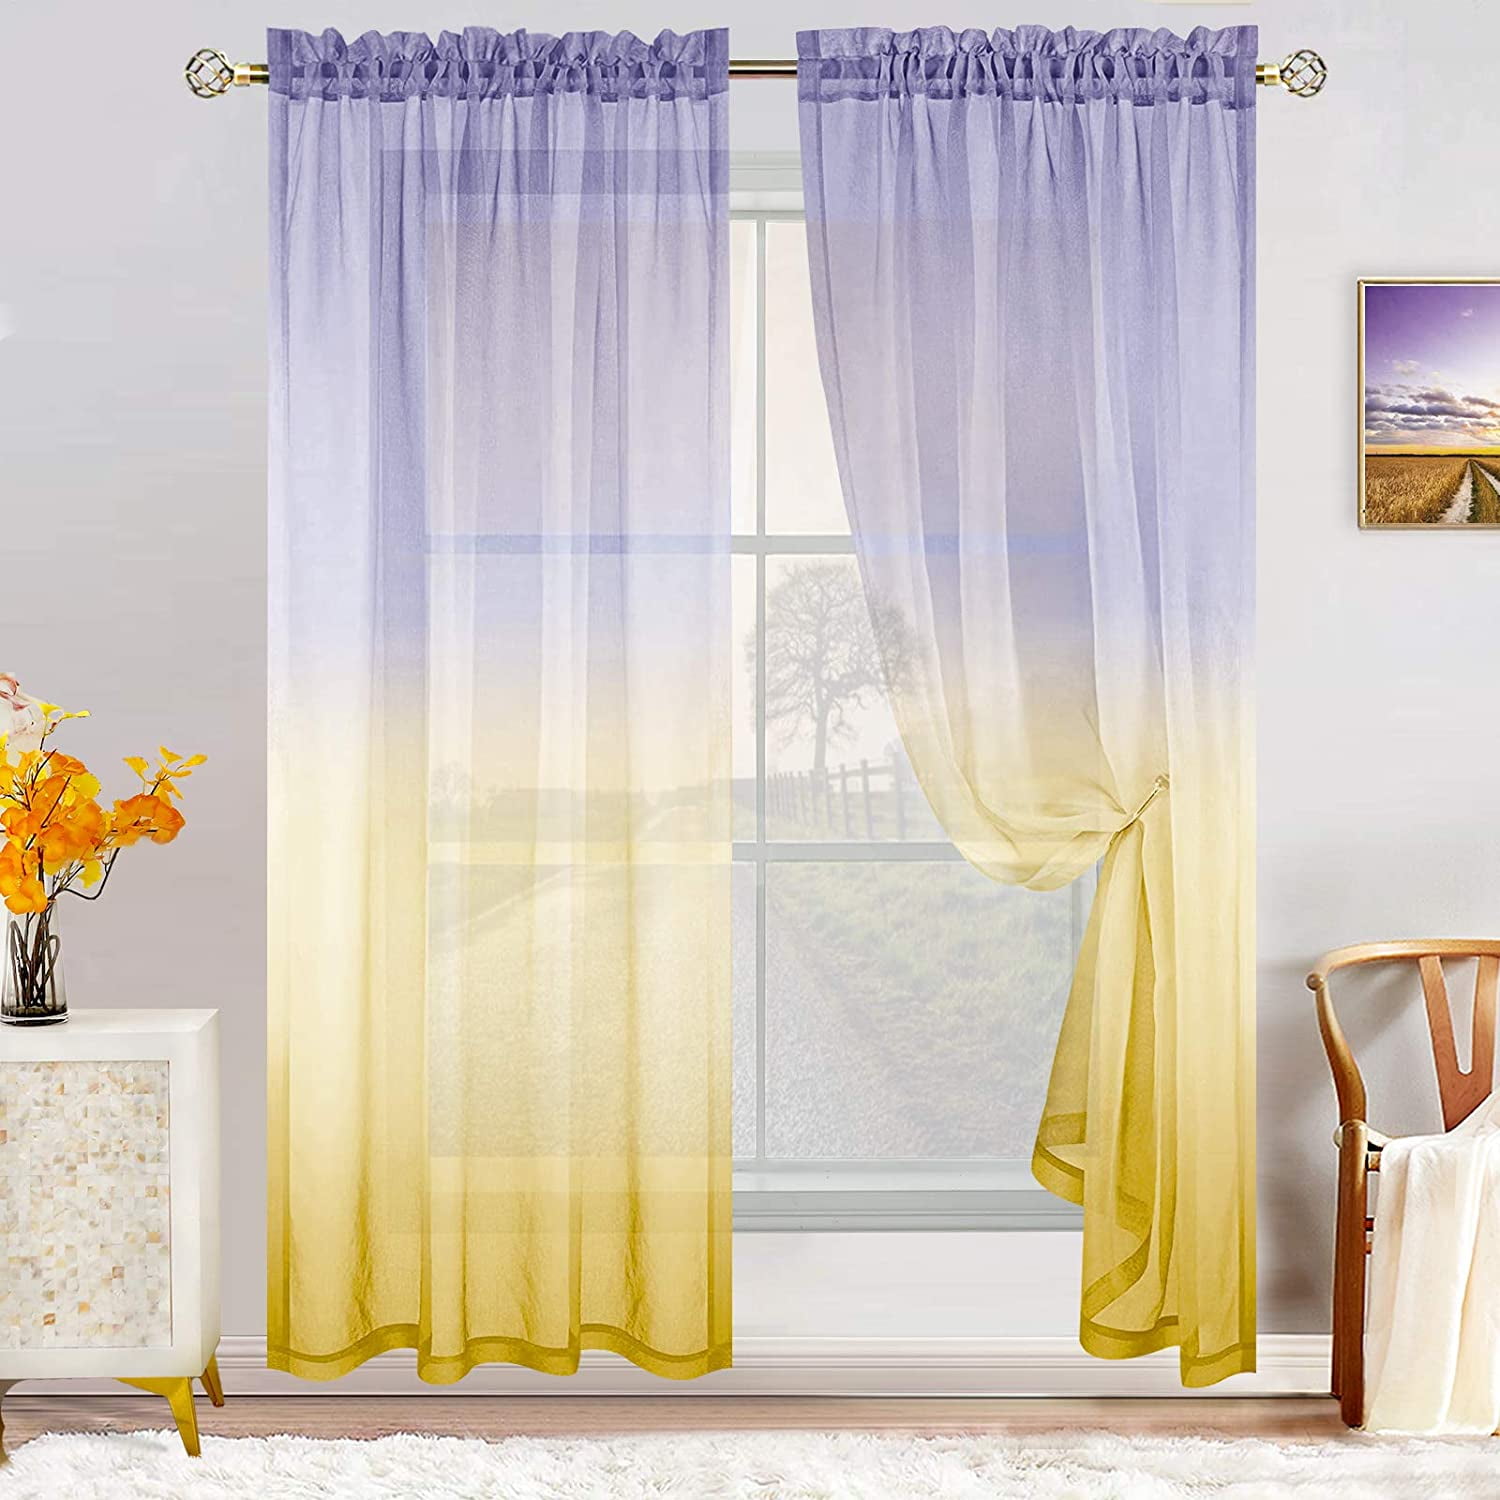 Details about   Set 2 Sheer Yellow Purple Ombre Fade Curtains Panels Drapes Pair 63 72 84 inch L 